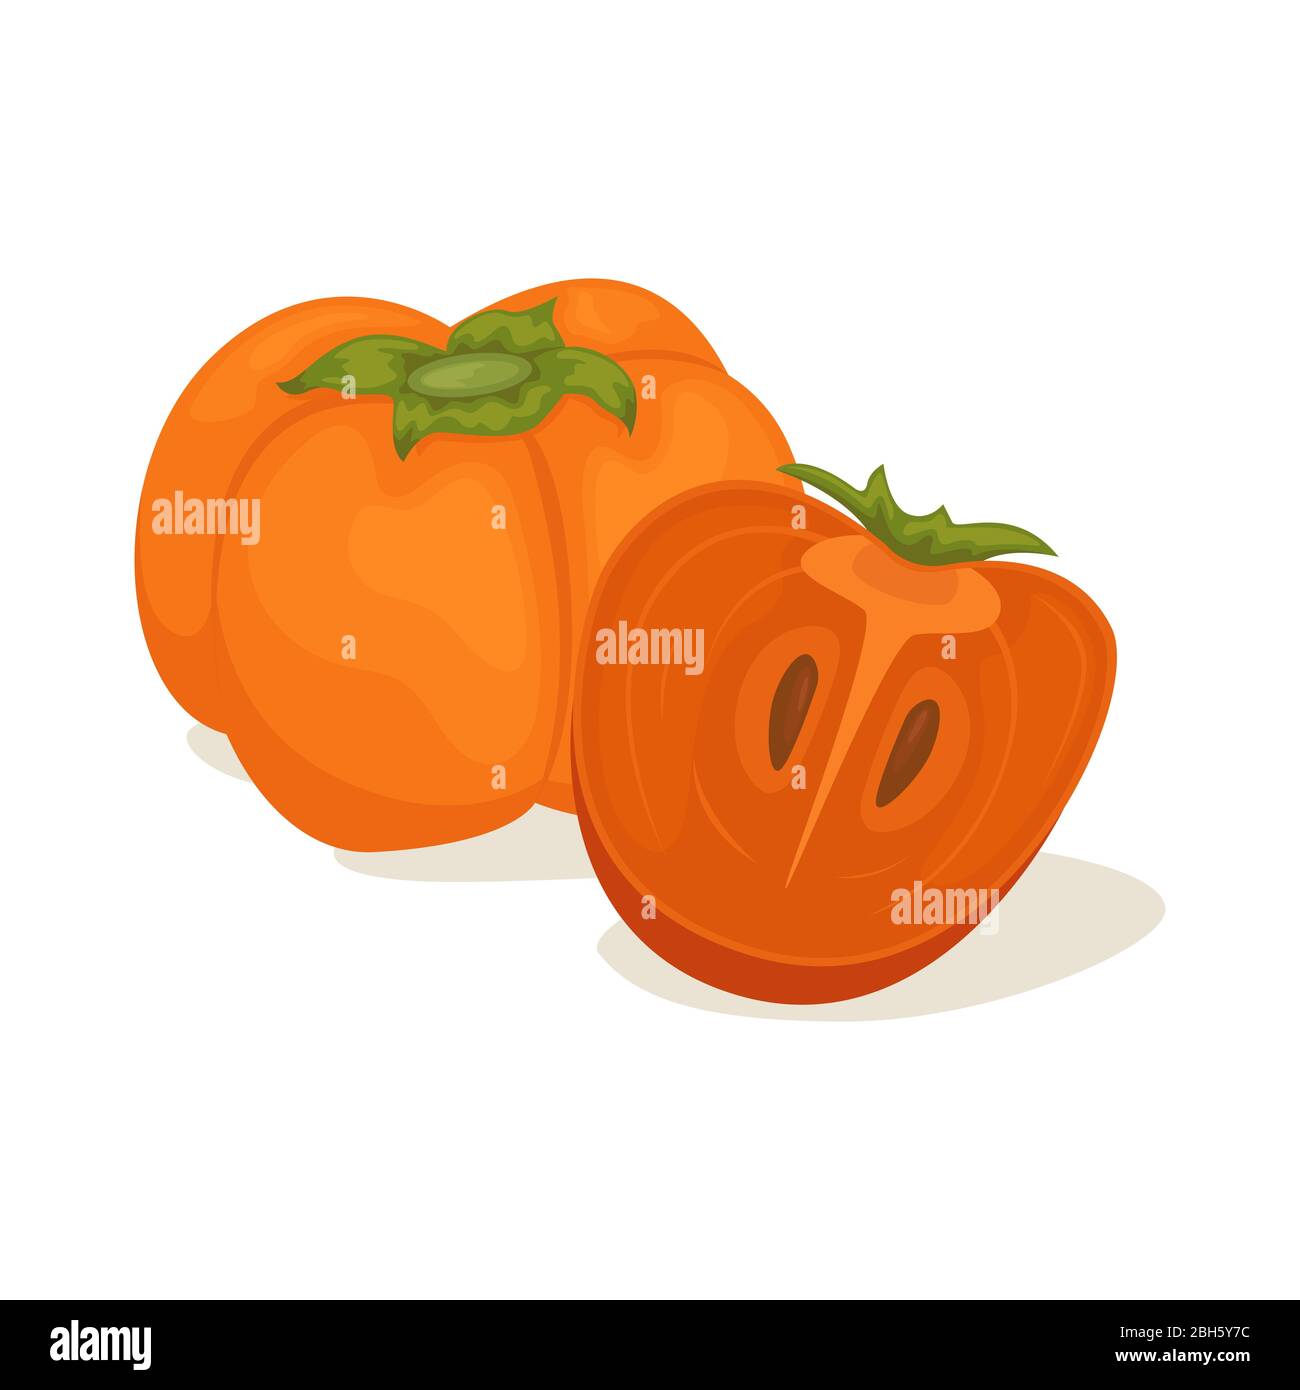 Ripe persimmon with a green leaf. Vector illustration of fruit. Stock Vector